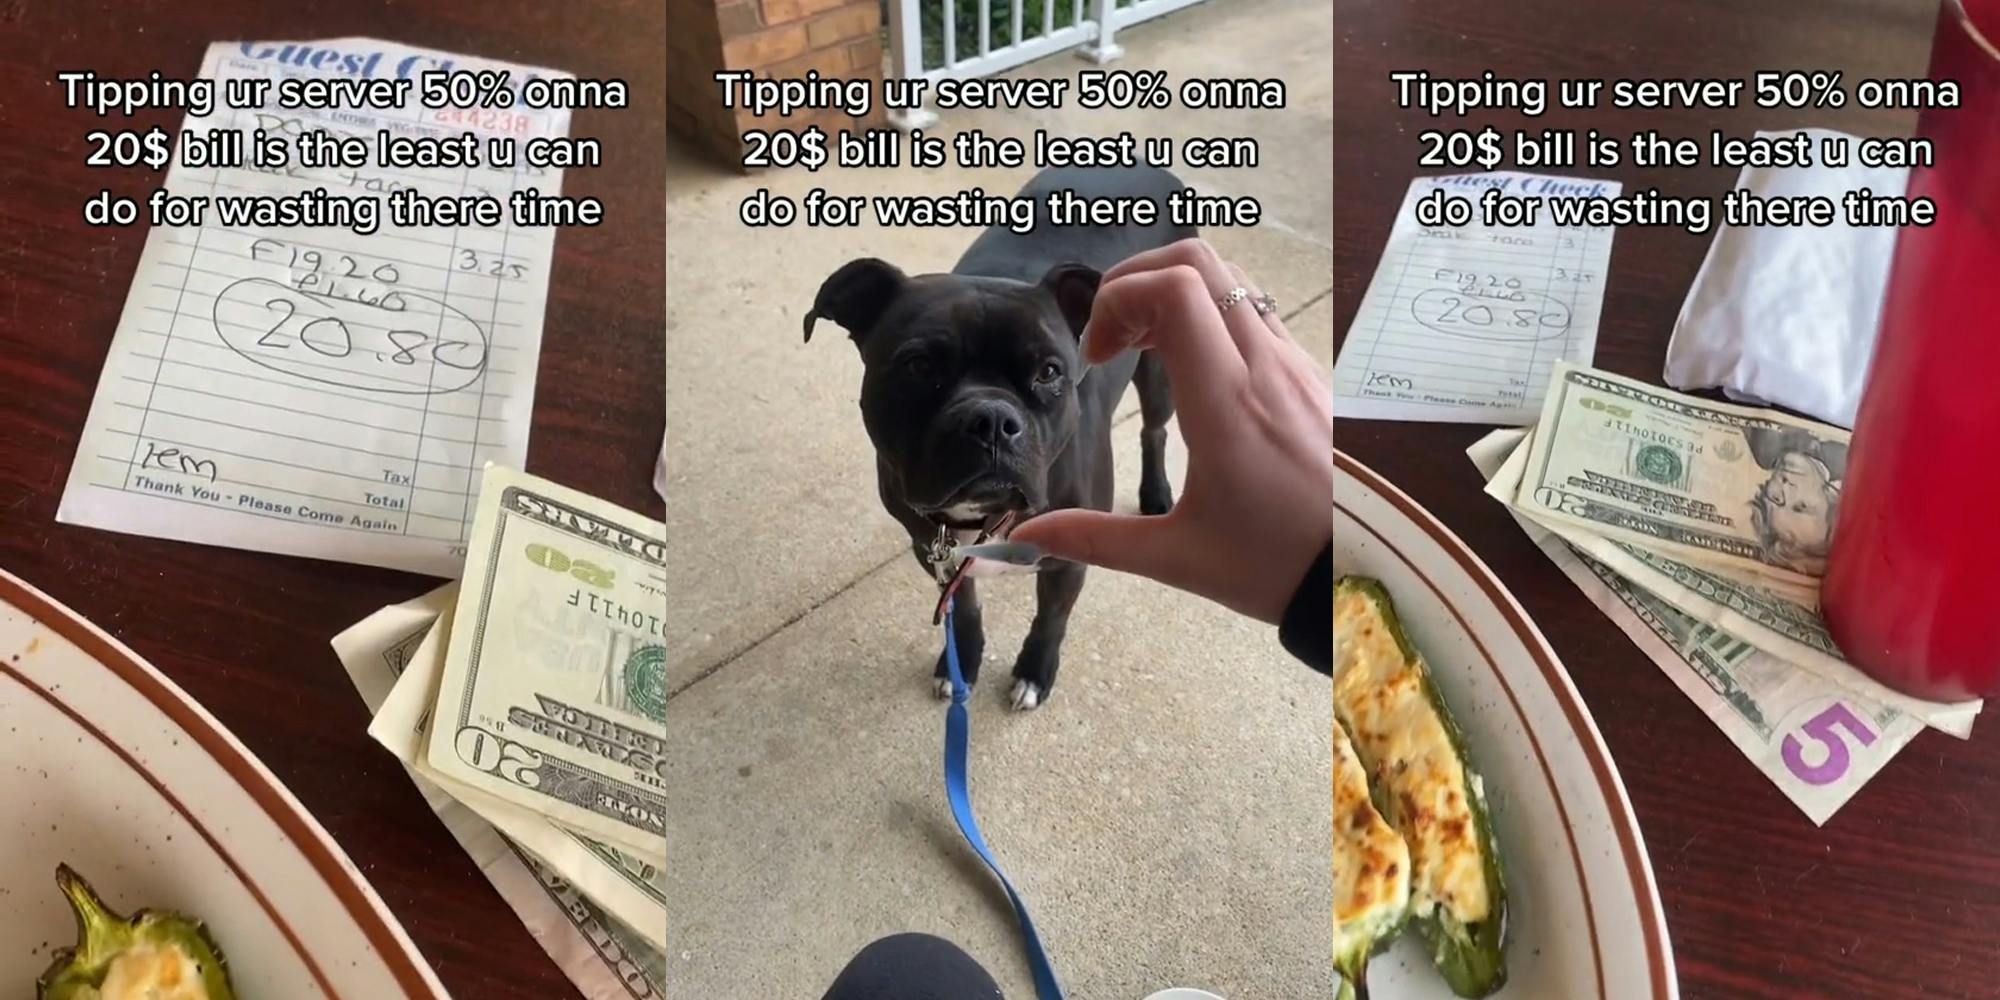 bill on table with cash tip with caption "Tipping ur server 50% onna 20$ bill is the least u can do for wasting there time" (l) dog with hand with caption "Tipping ur server 50% onna 20$ bill is the least u can do for wasting there time" (c) bill on table with cash tip with caption "Tipping ur server 50% onna 20$ bill is the least u can do for wasting there time" (r)